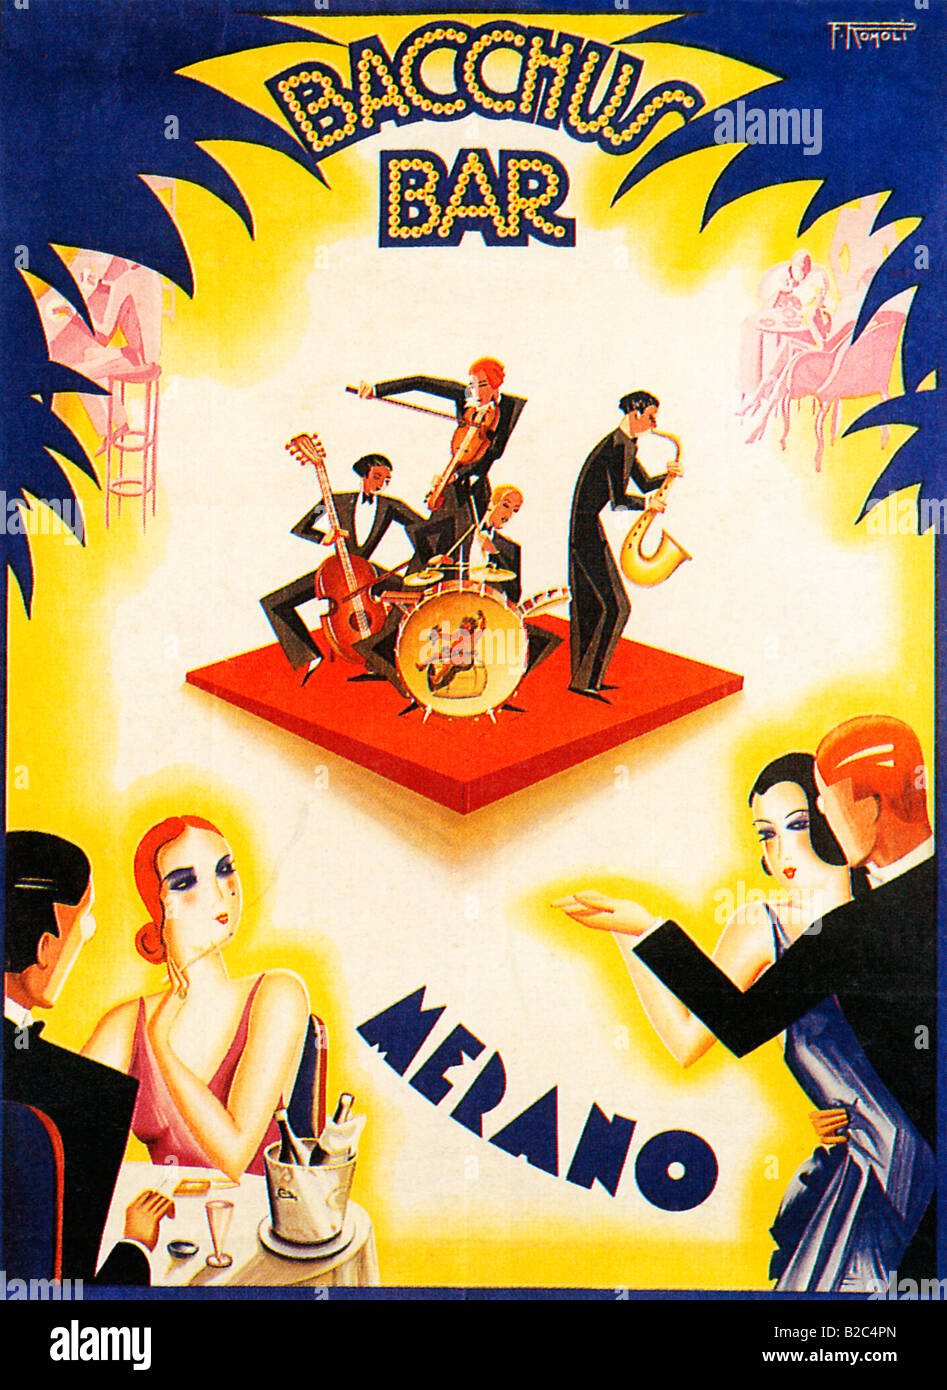 Bacchus Bar 1930 Art Deco poster for a bar in the Italian Alpine spa resort of Merano jazz band playing Stock Photo